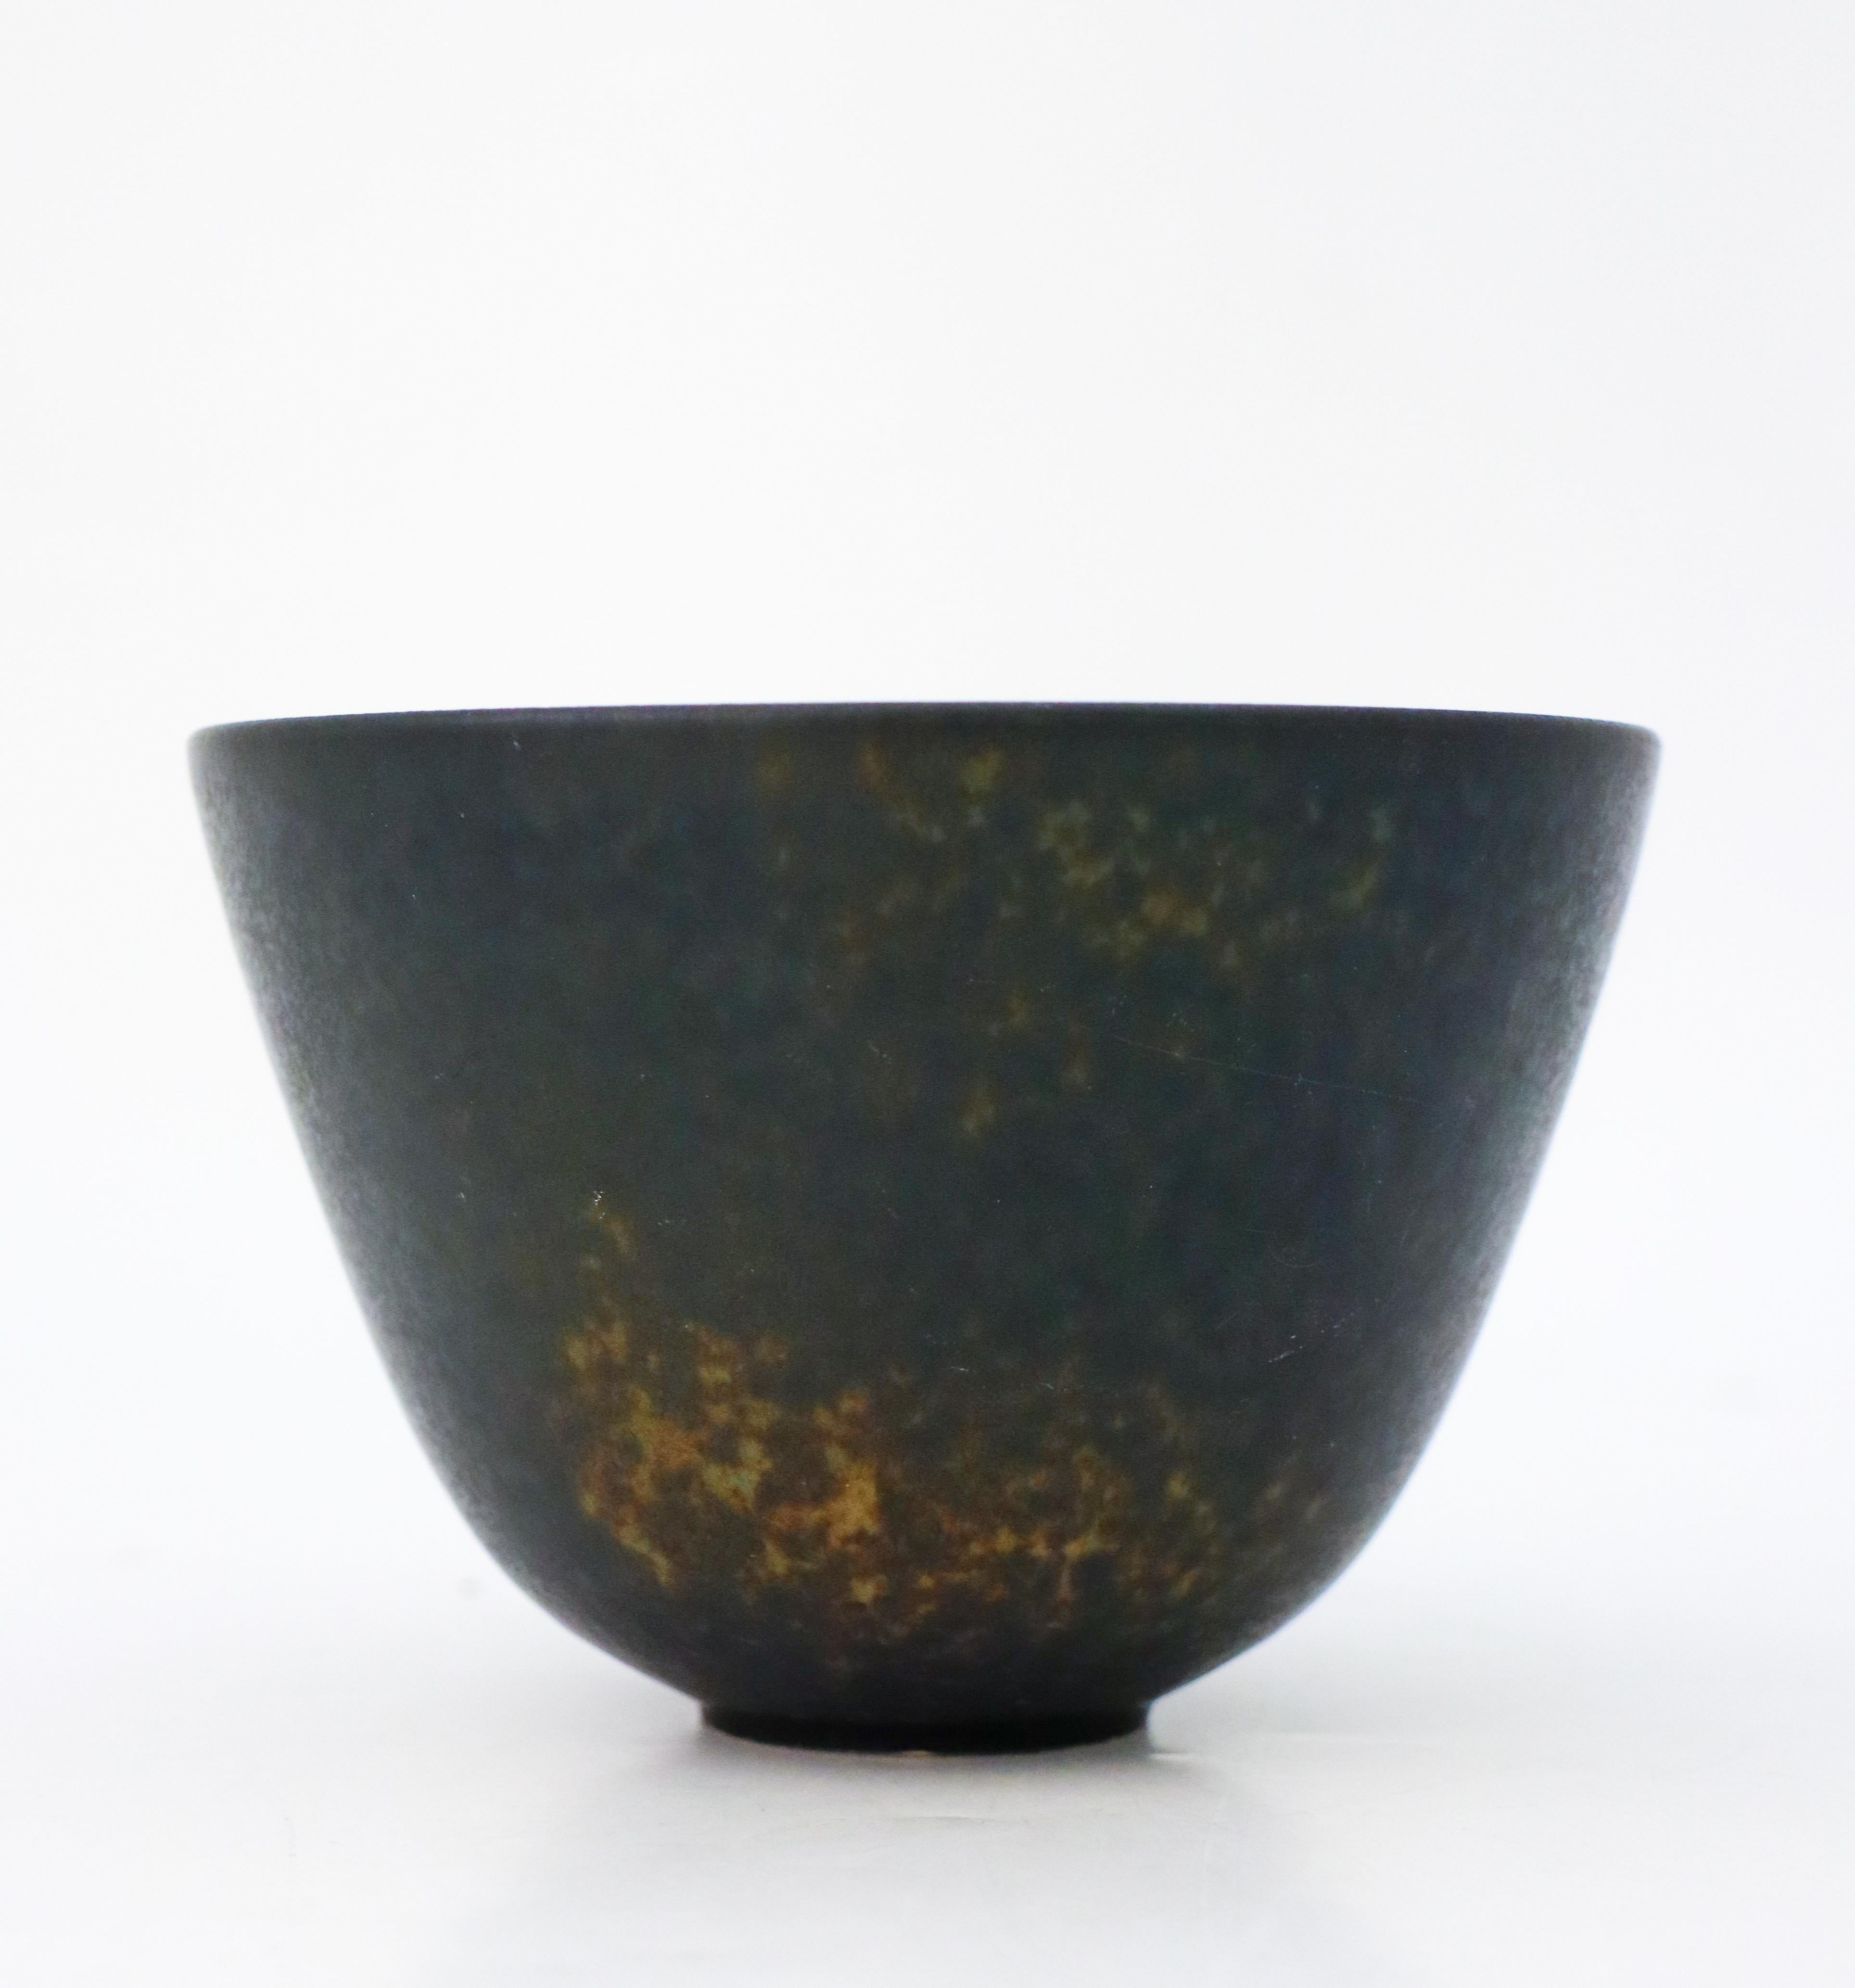 A black bowl designed by Gunnar Nylund at Rörstrand, the bowl is 9 cm (3.6